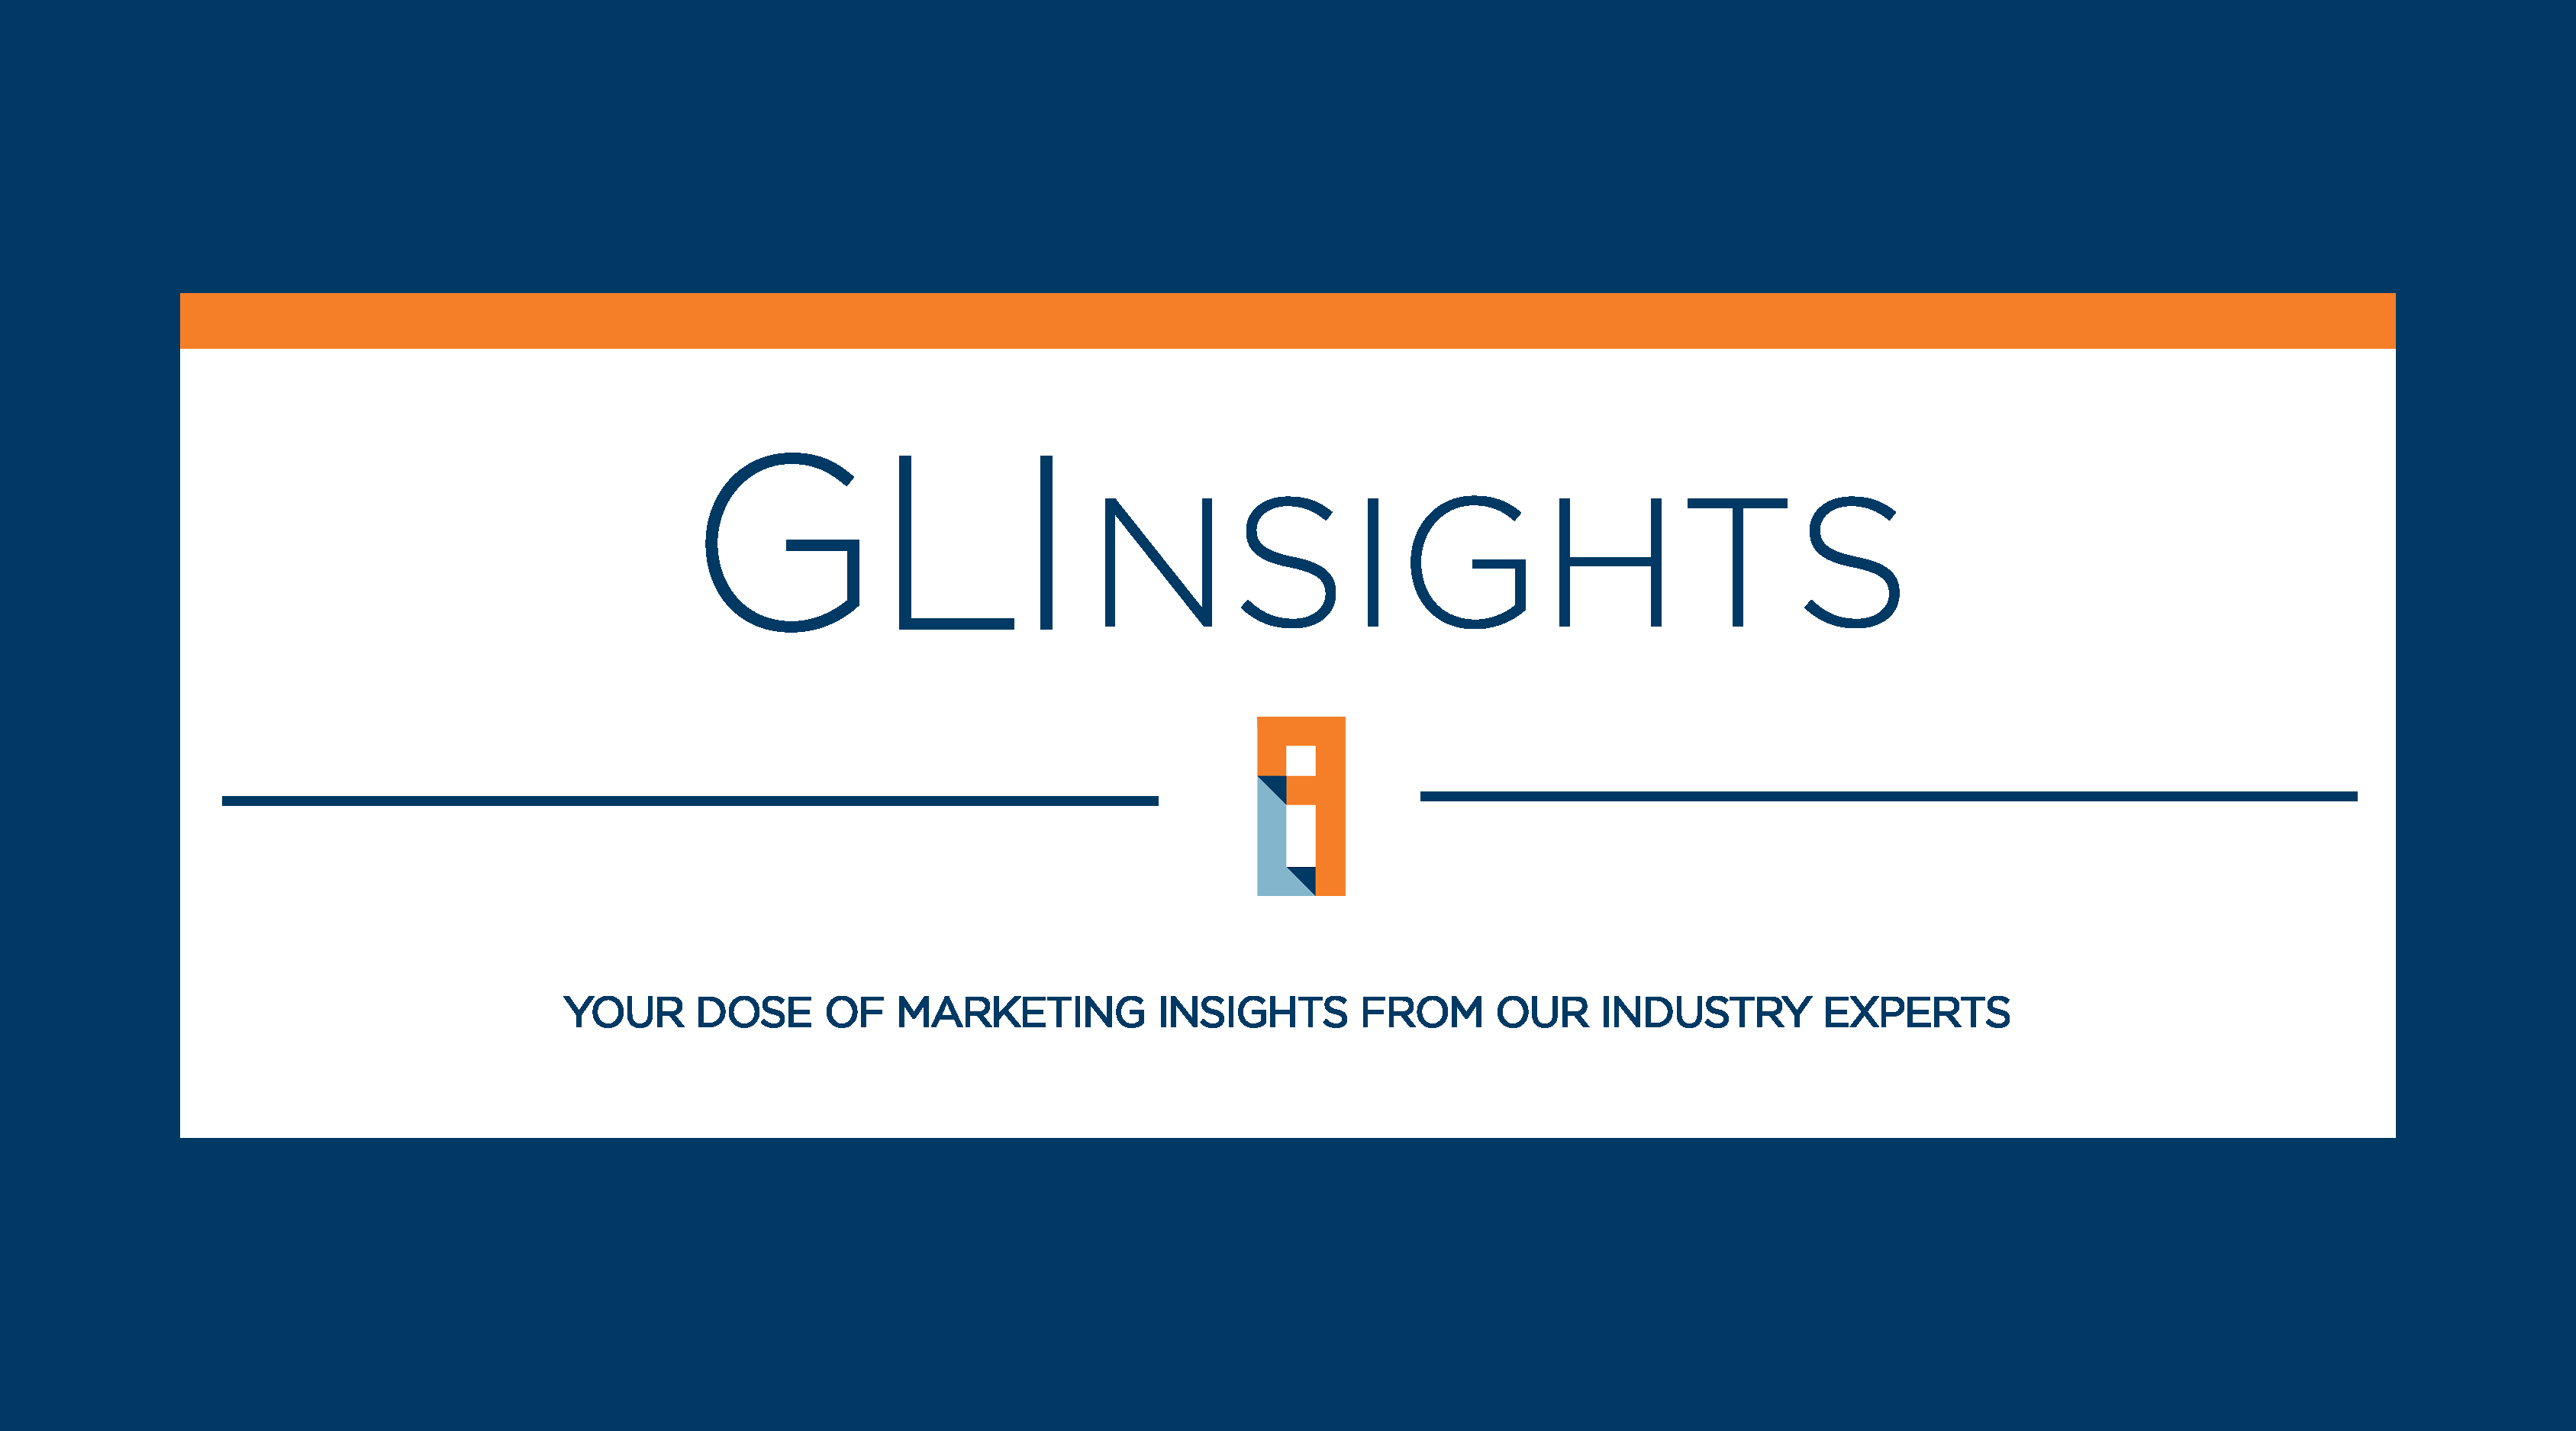 GLInsights: Your dose of marketing insights from our industry experts